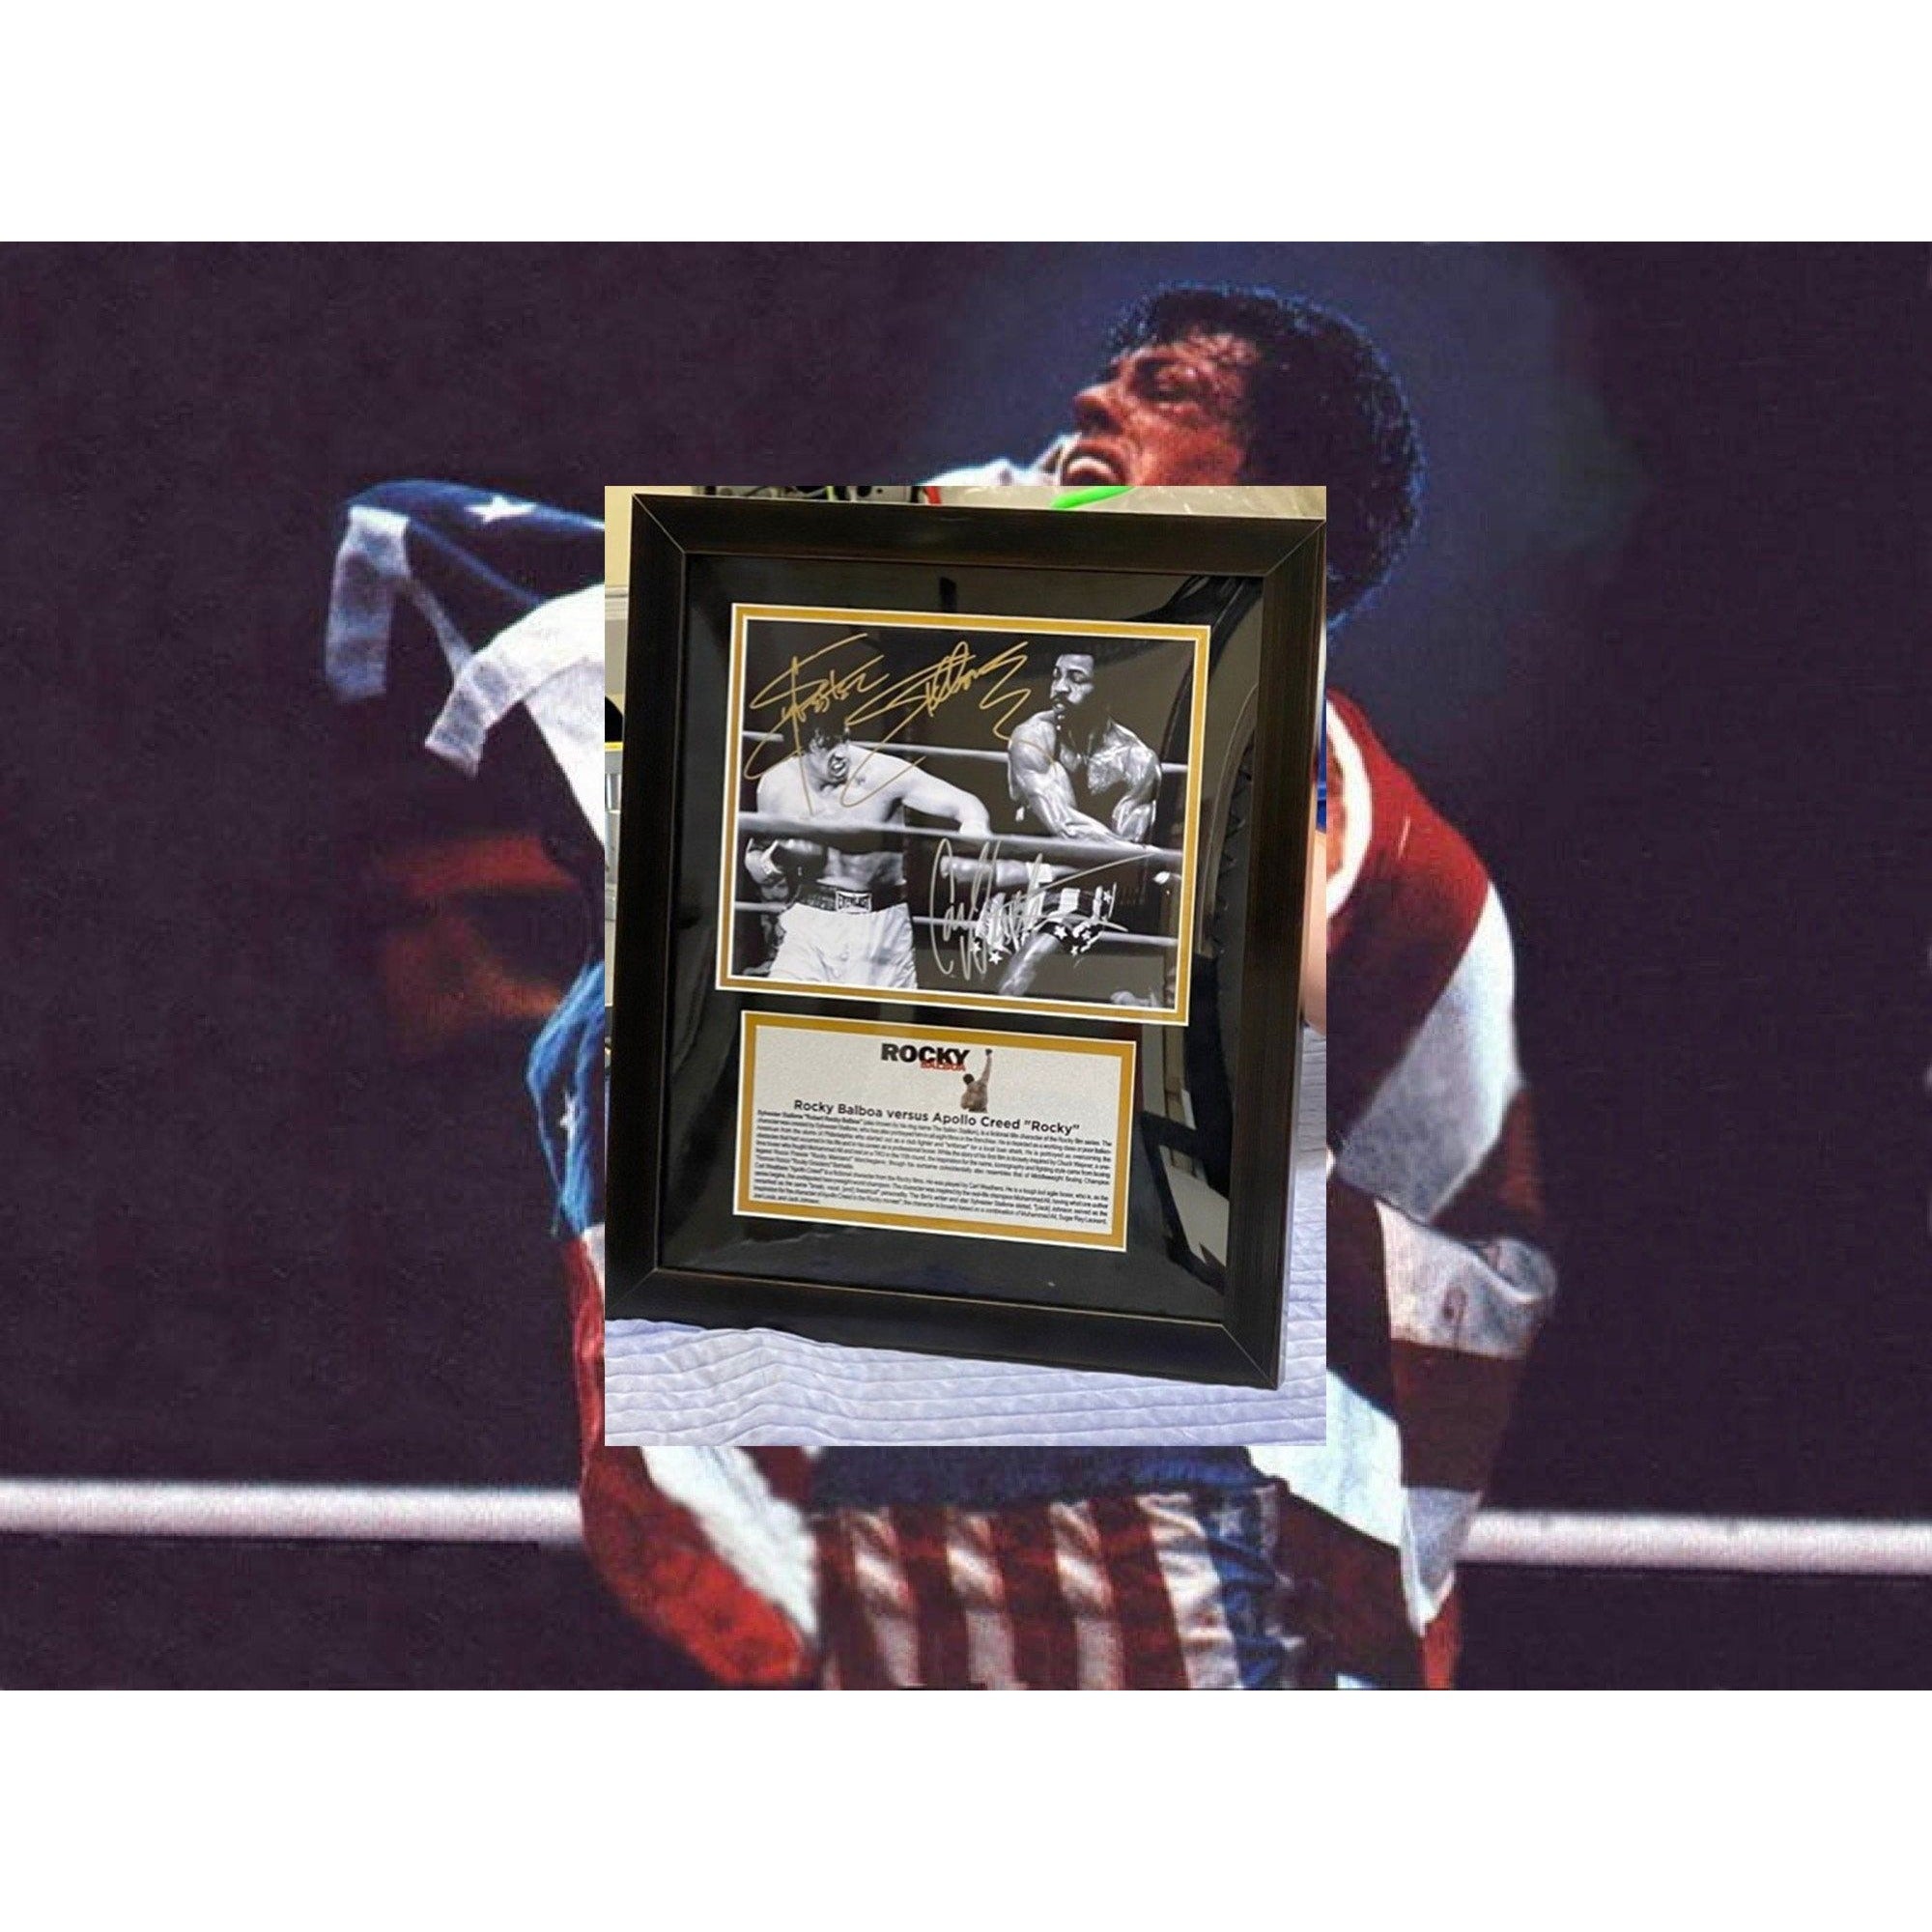 Rocky Sylvester Stallone & Carl Weathers signed and framed with proof